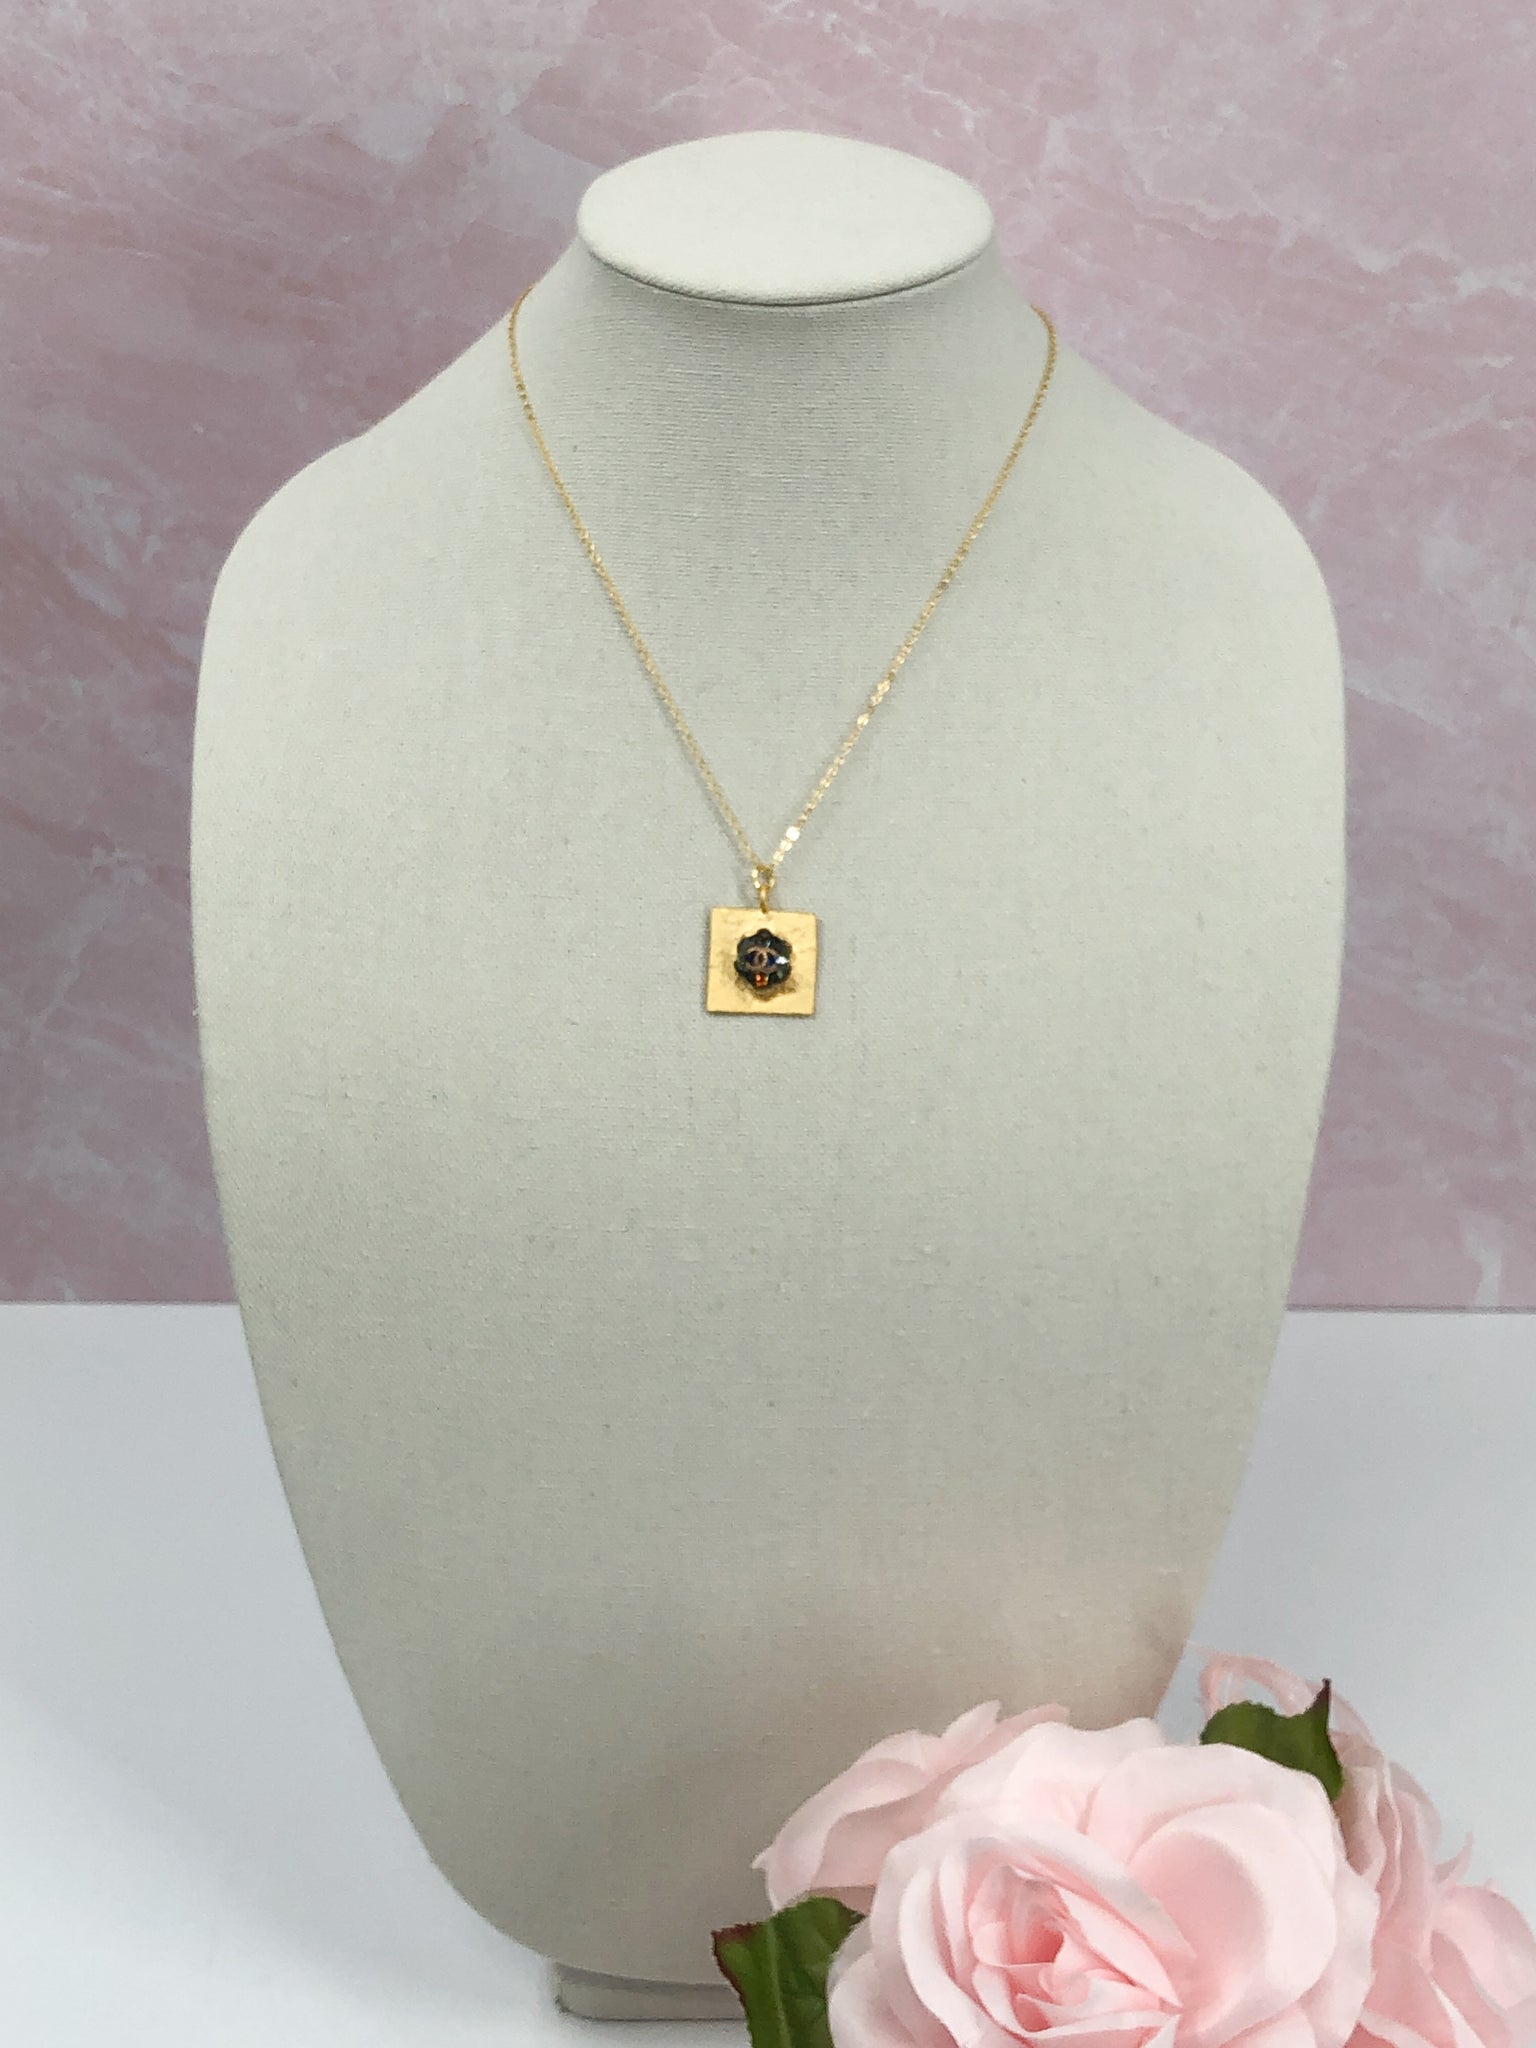 Skyla Square Pendant with Iridescent Vintage Chanel Button - Modern Vintage Creations